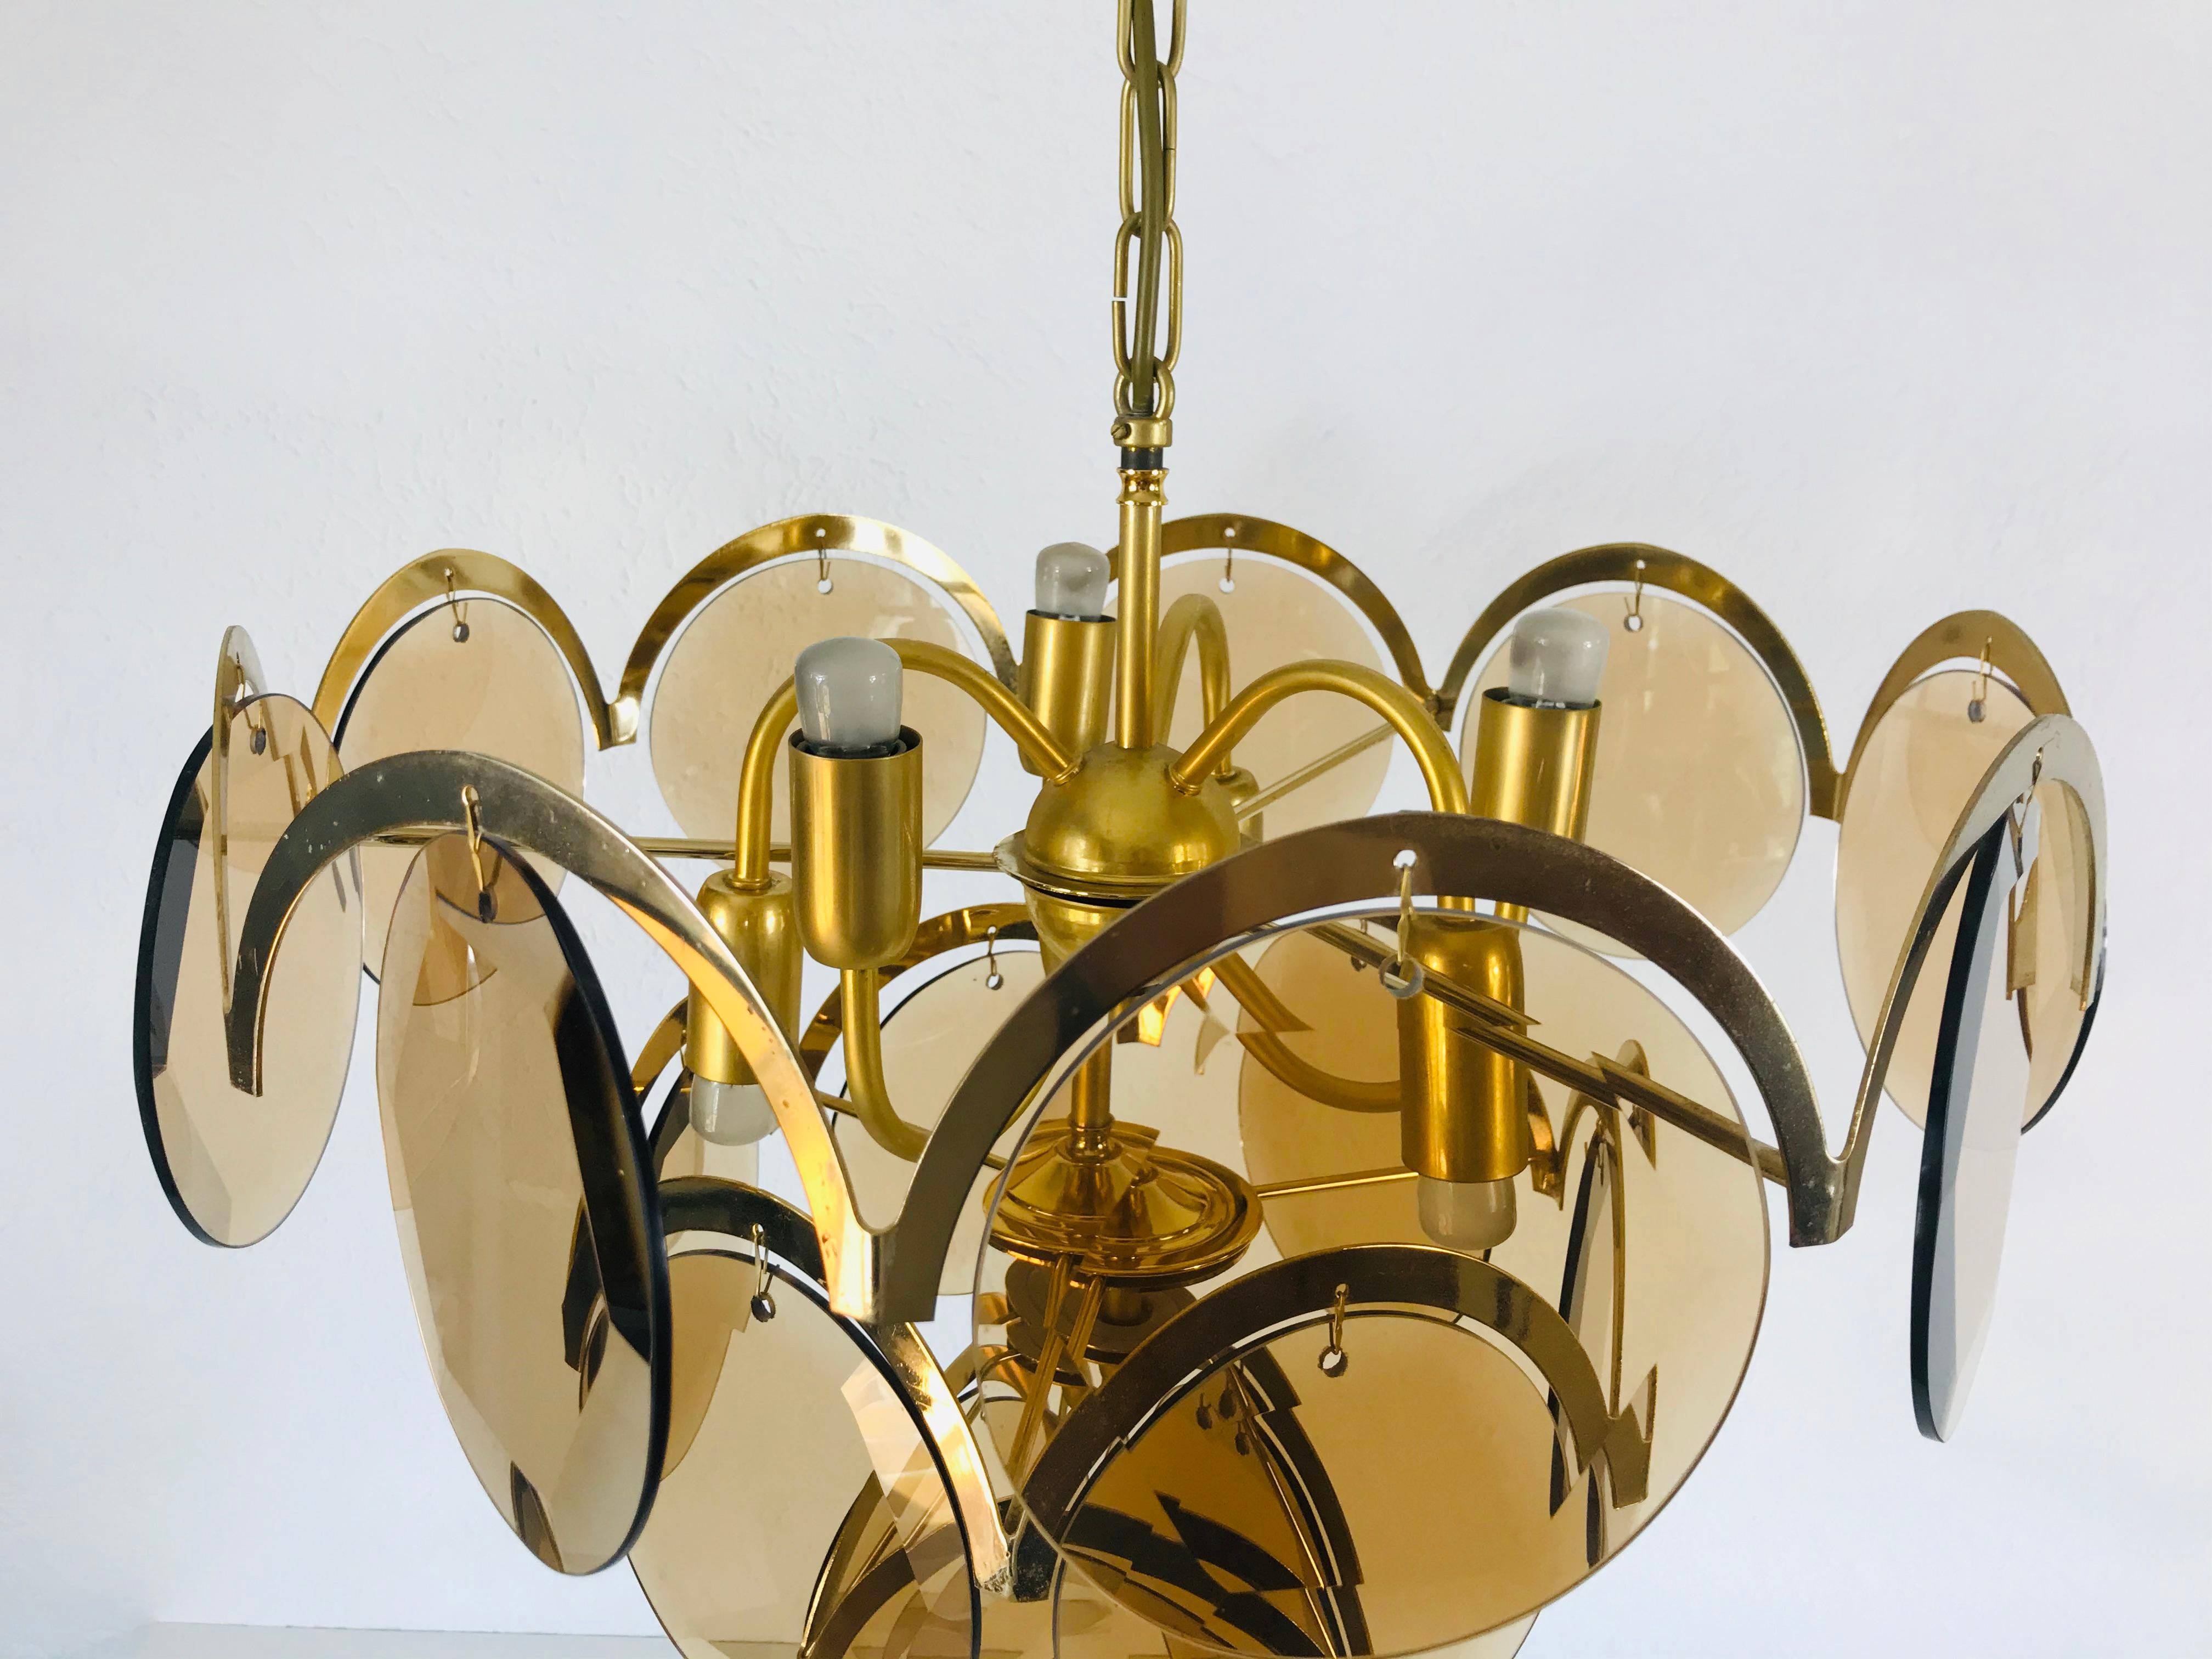 Midcentury Three-Tier Brass and Glass Chandelier by Vistosi, 1960s For Sale 8